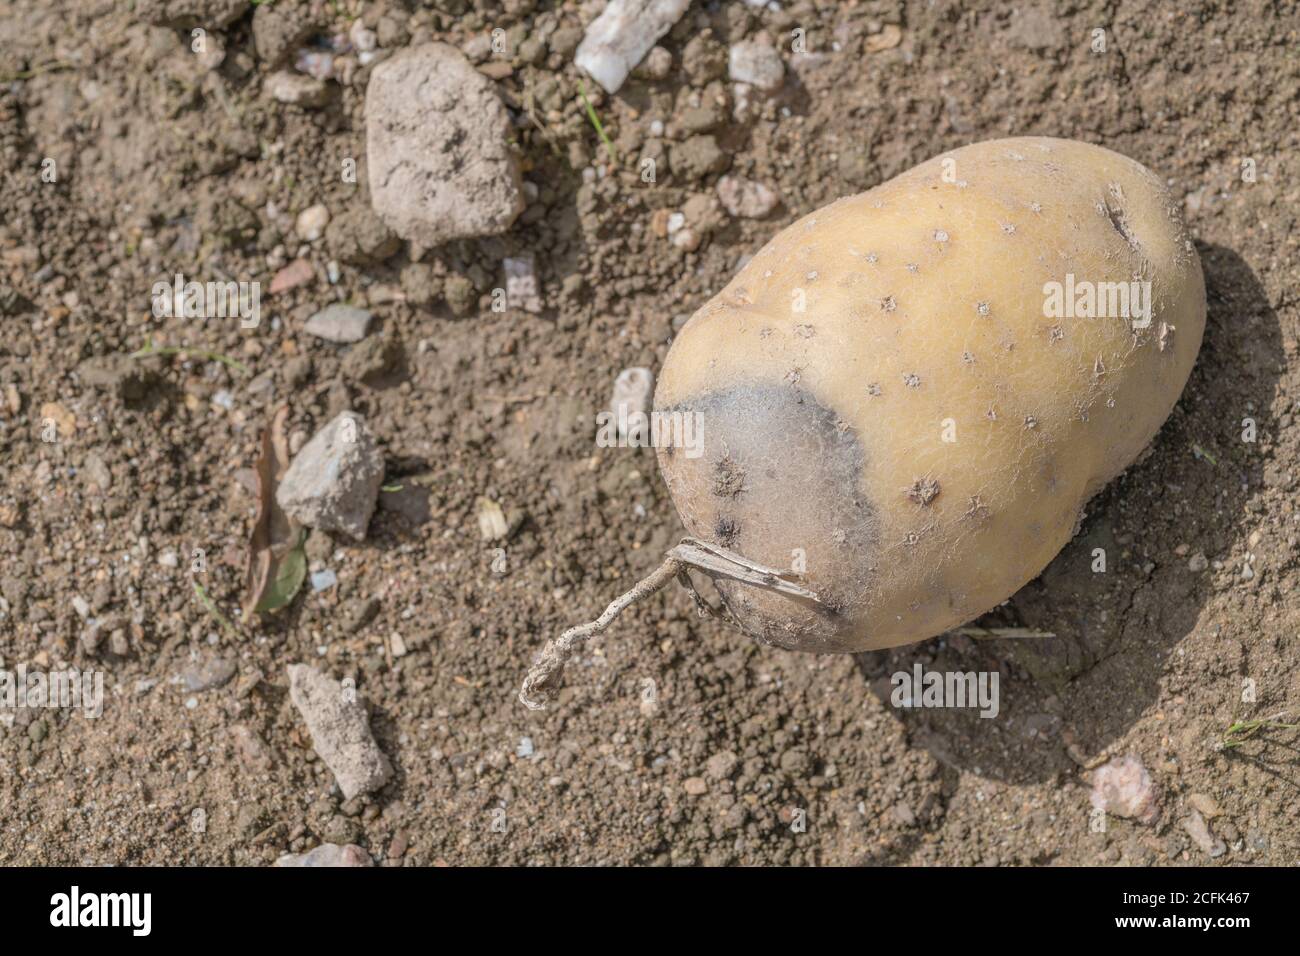 Disease damage / diseased potato. Perhaps the first outward signs of bacterial potato Soft Rot, but uncertain. Stock Photo